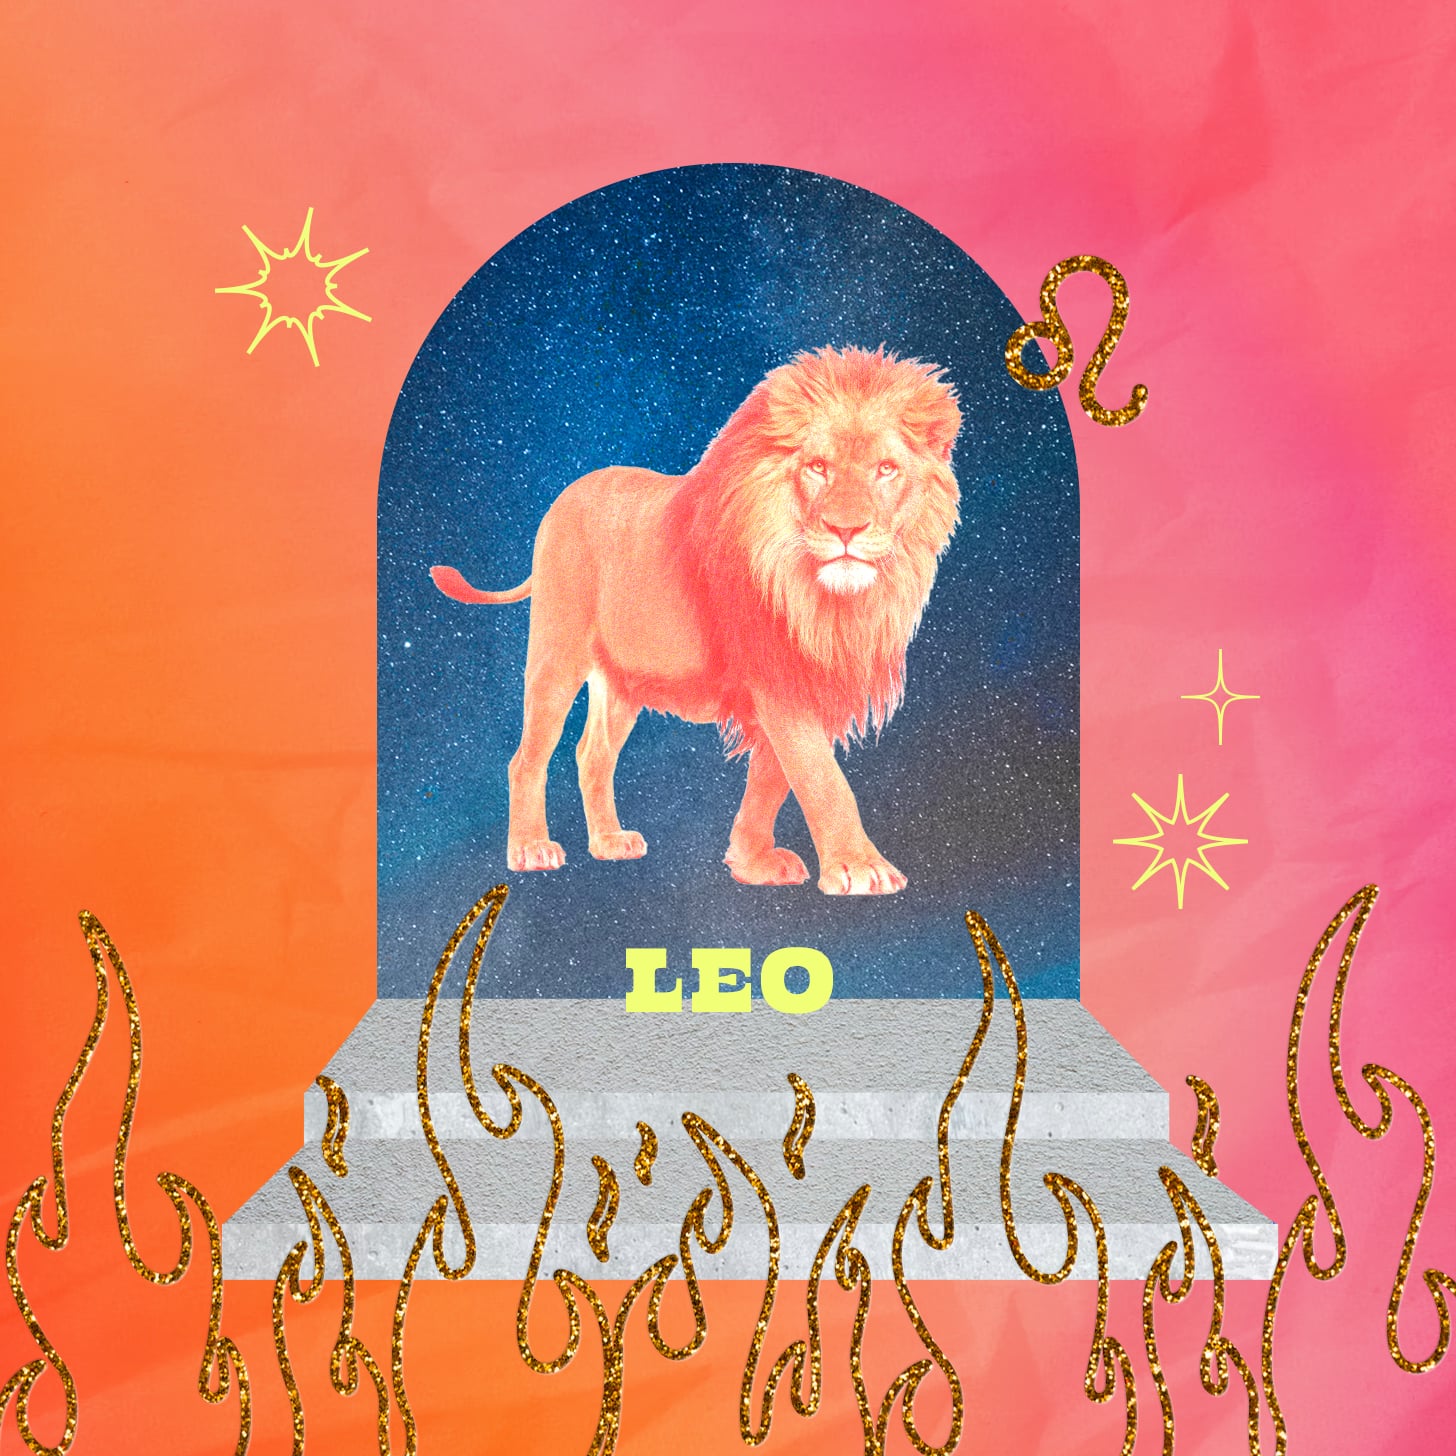 Leo weekly horoscope for August 21, 2022